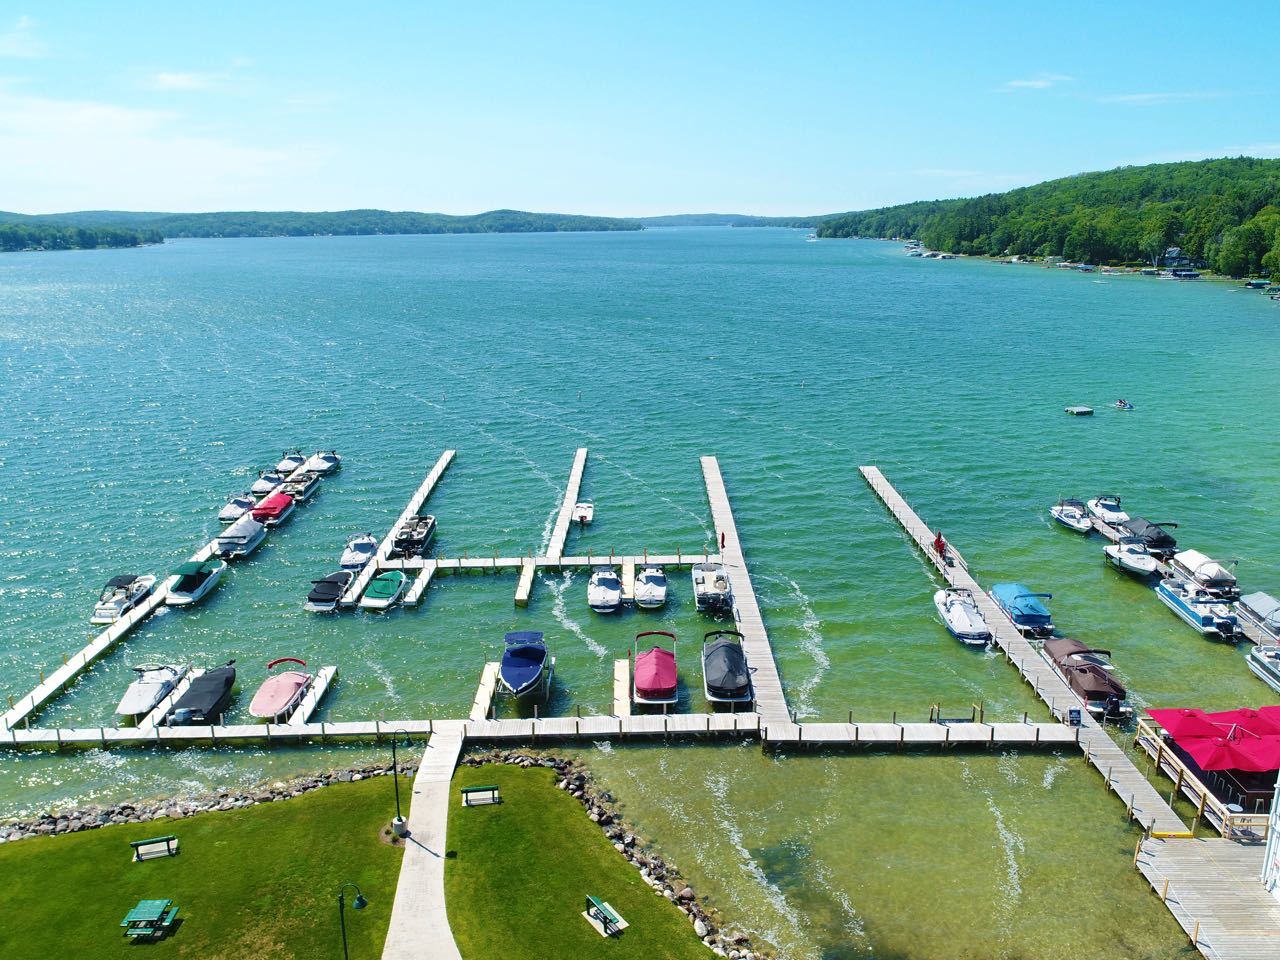 First Timers Guide To Walloon Lake, Michigan